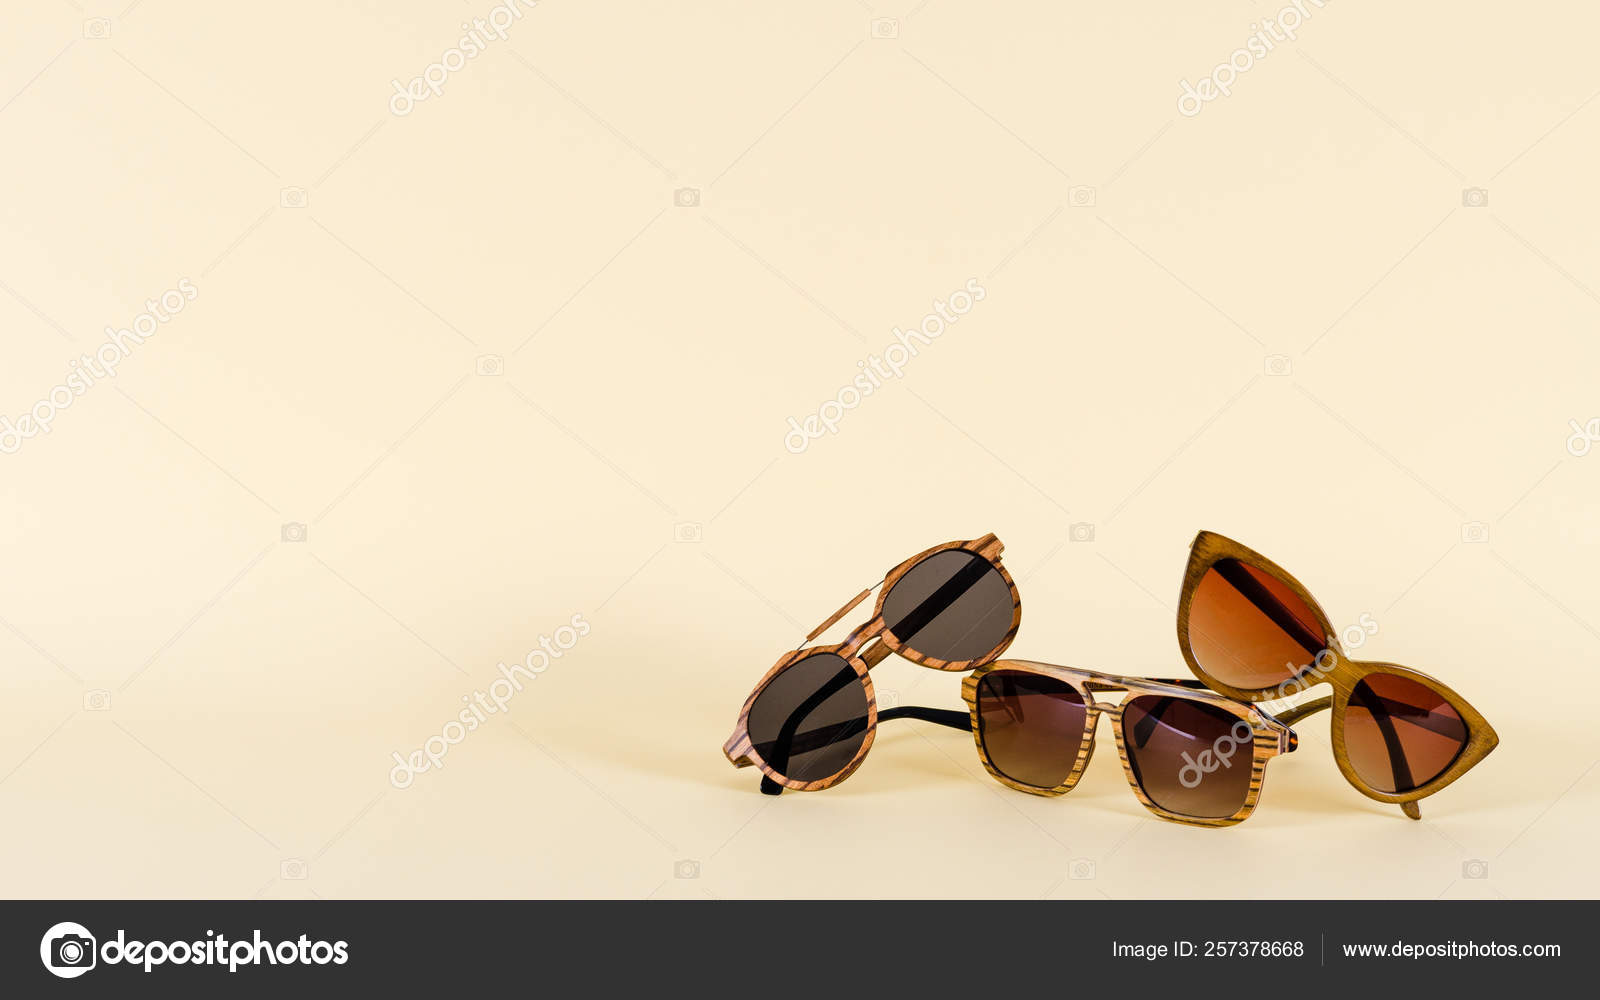 Wooden sunglasses of different design on yellow background. Copy space.  Sunglasses sale concept. For banner optic shop Stock Photo by  ©dina160987.gmail.com 257378668